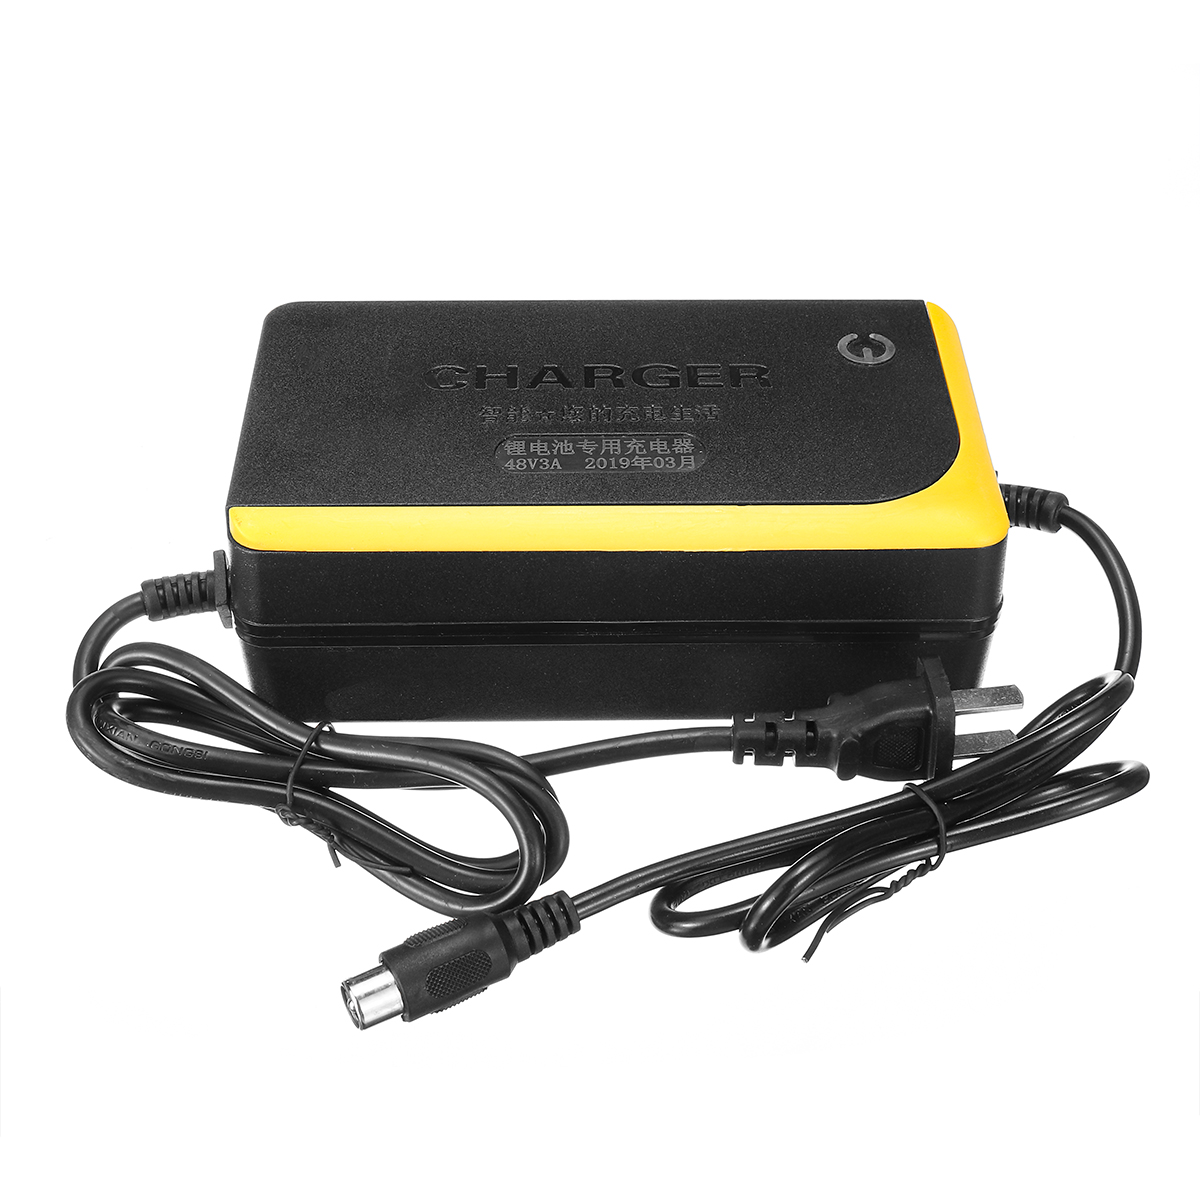 48V-3A-Lithium-Battery-Charger-For-Skateboard-Single-wheeled-Electric-Bicycle-1443394-2